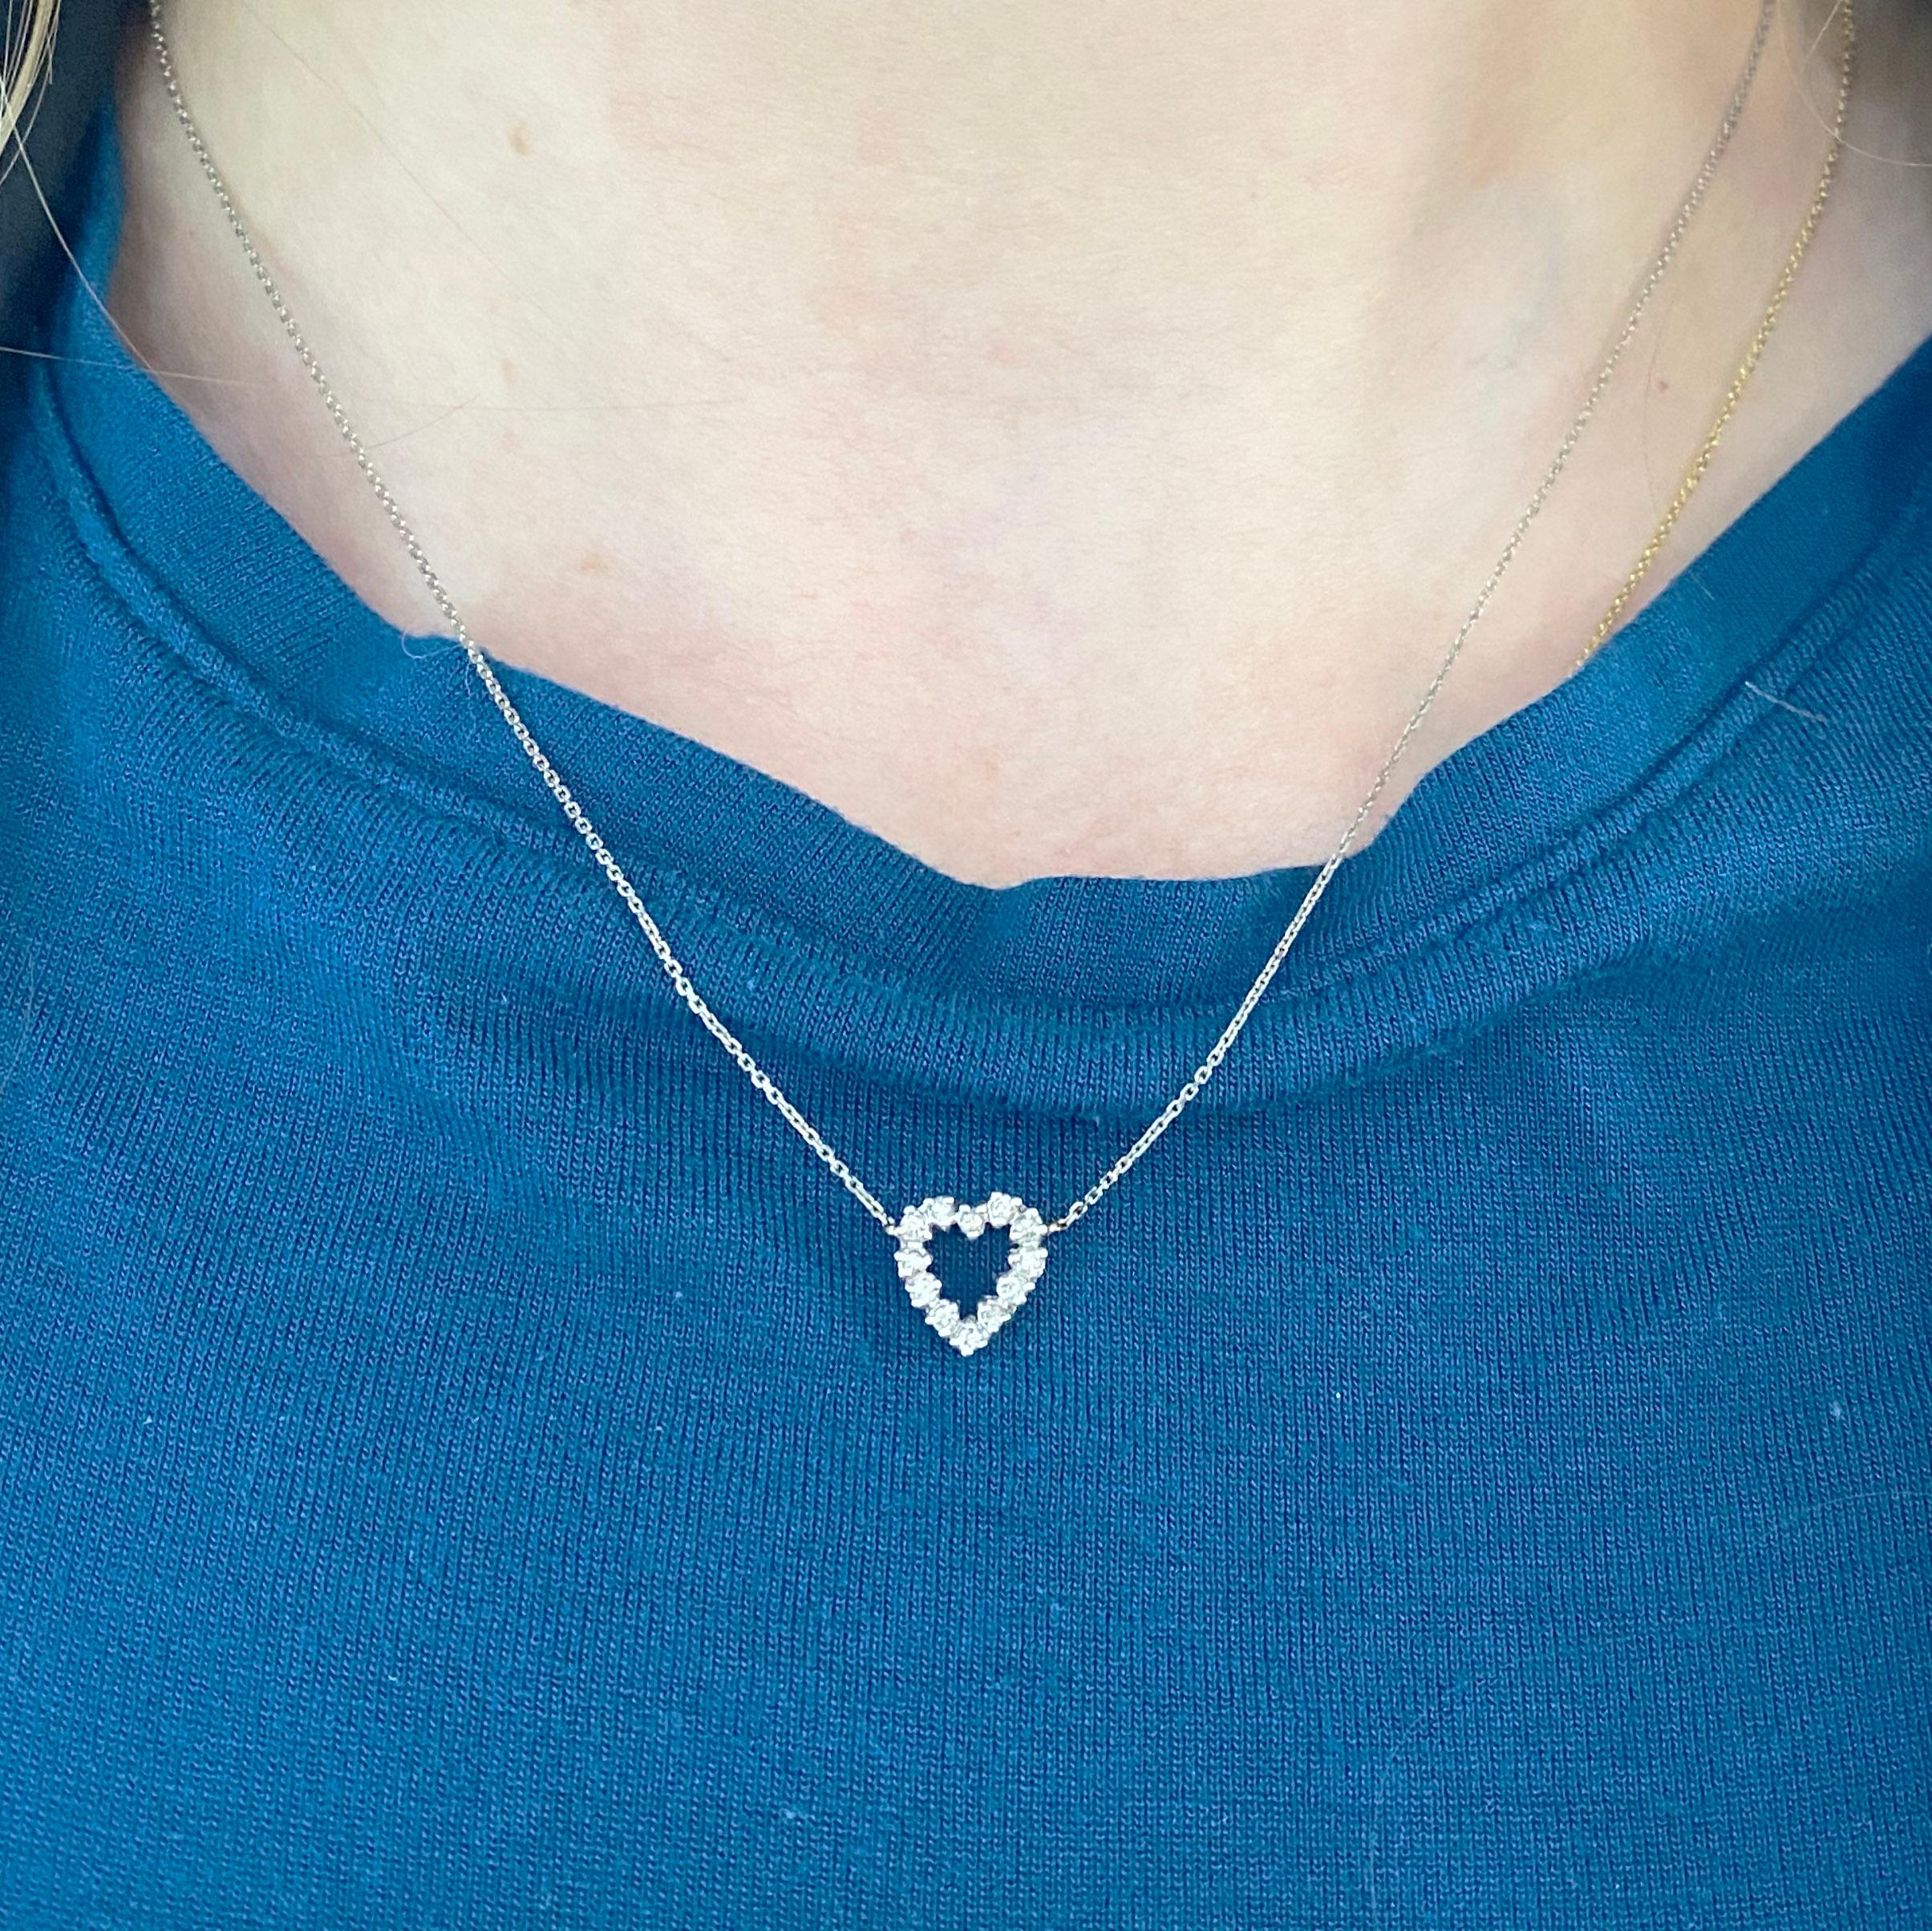 This gorgeous 14k white gold open heart pendant dripping with diamonds is sure to put a smile on anyone's face! This necklace looks beautiful worn by itself and also looks wonderful in a necklace stack. This necklace would make a wonderful gift for